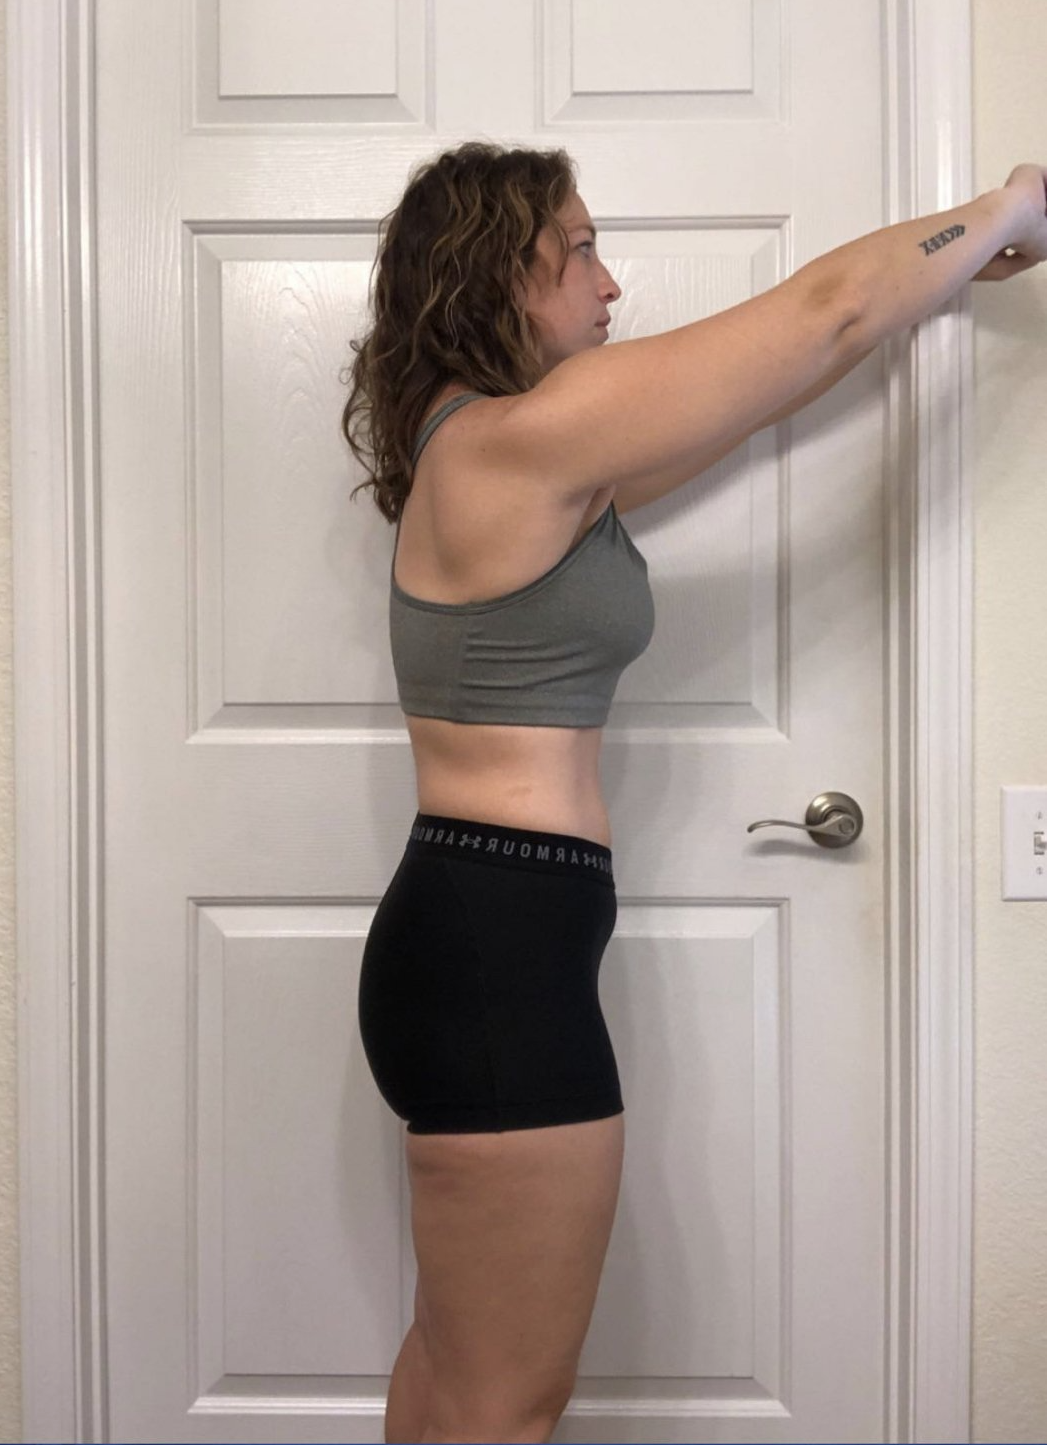 A woman in a sports bra and shorts is standing in front of a door.